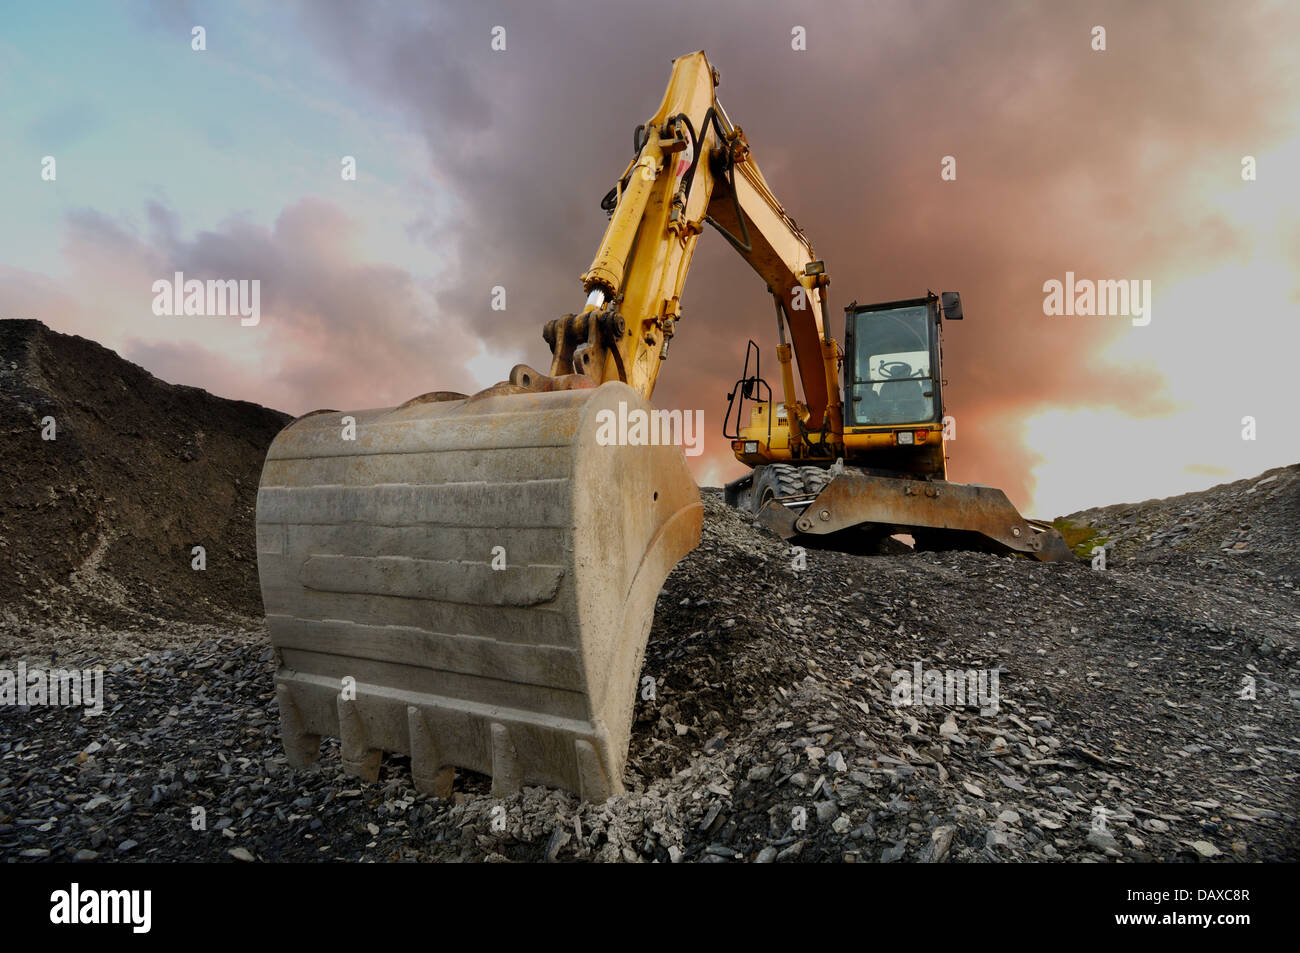 Image of a wheeled excavator on a quarry spoil heap Stock Photo